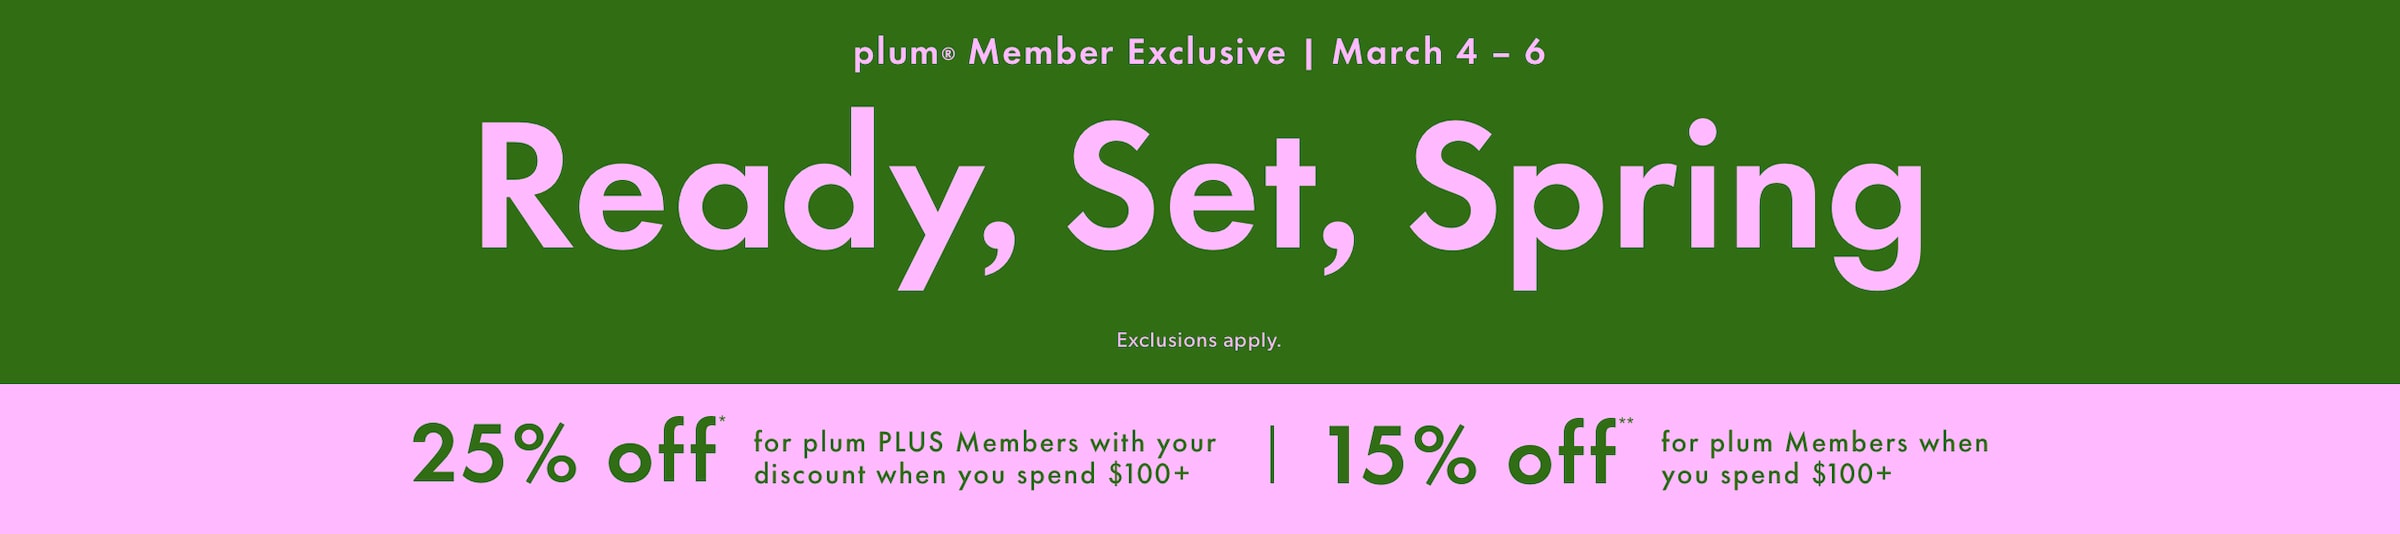 plum Member Exclusive. Ready, Set, Spring Sale - 25% off for plum plus members, 15% off for plum members when you spend $100+